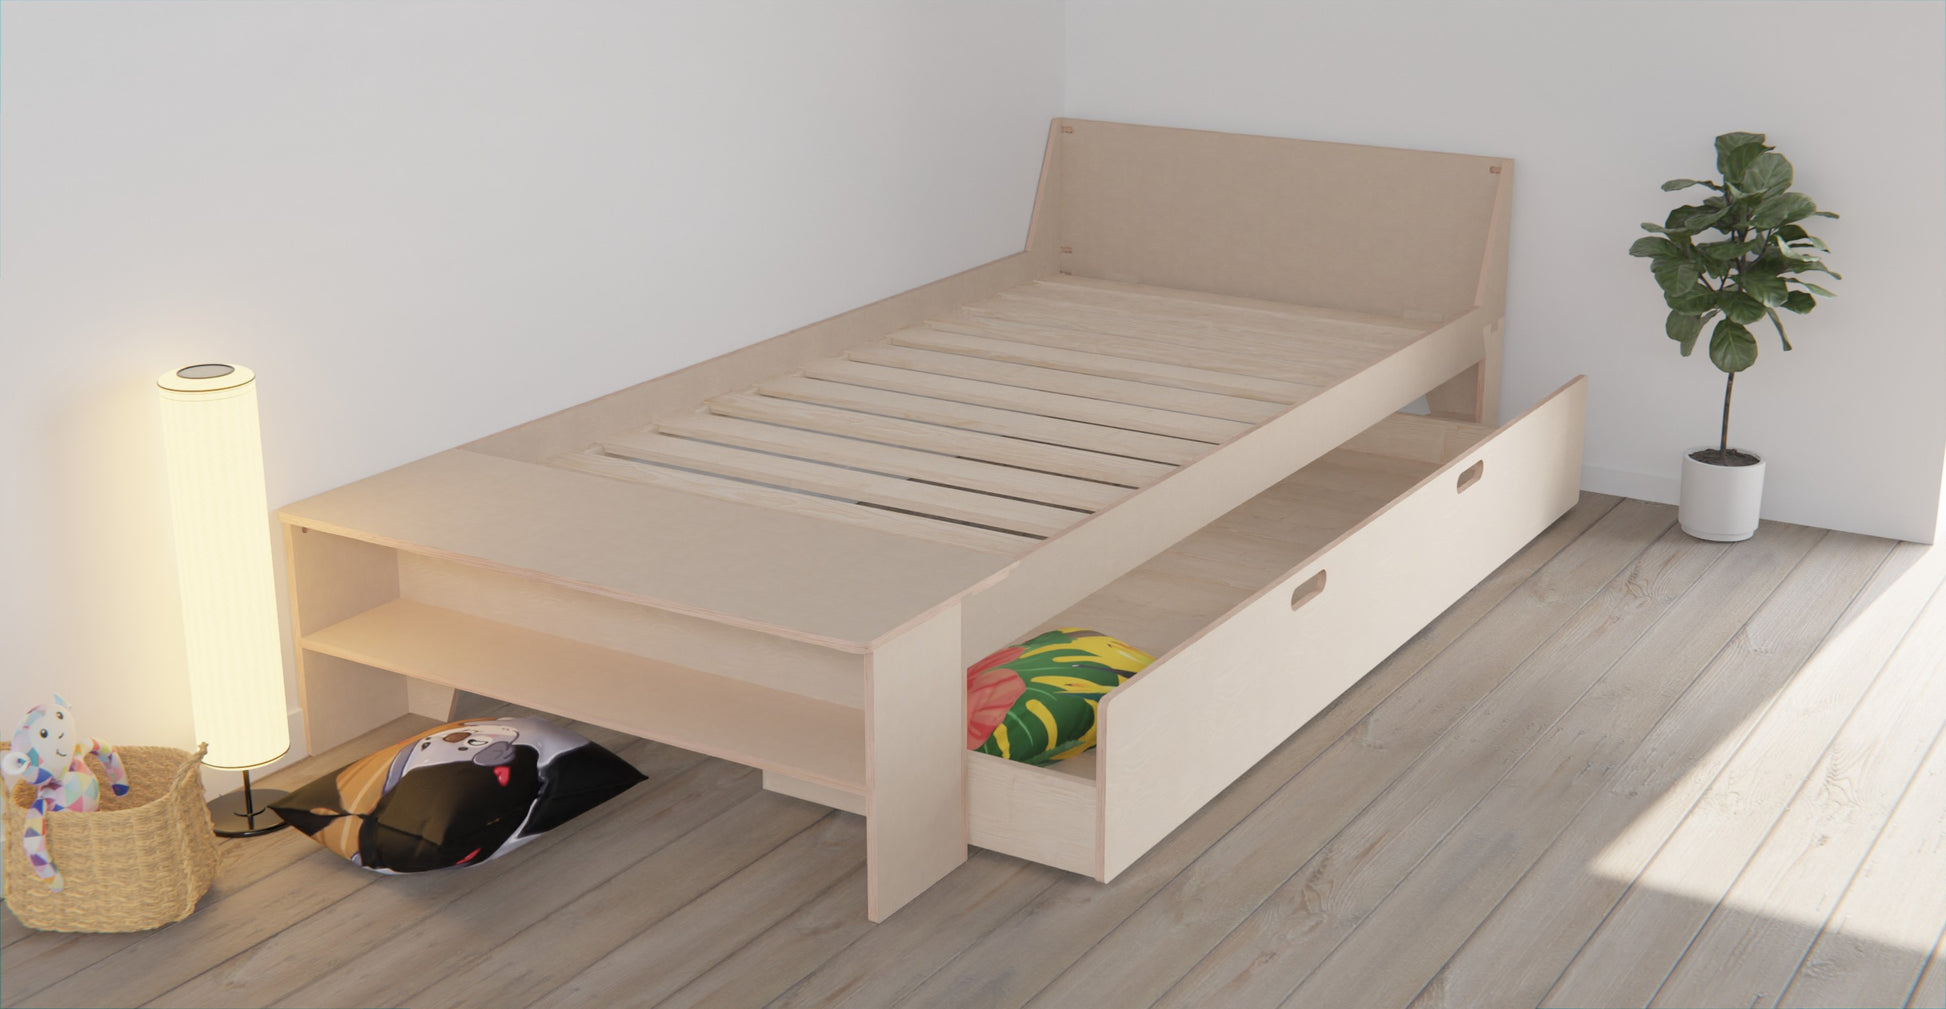 Maximise both safety and storage with our space-saving bed frame. Low profile, convenient storage drawer, and customisable guardrails.